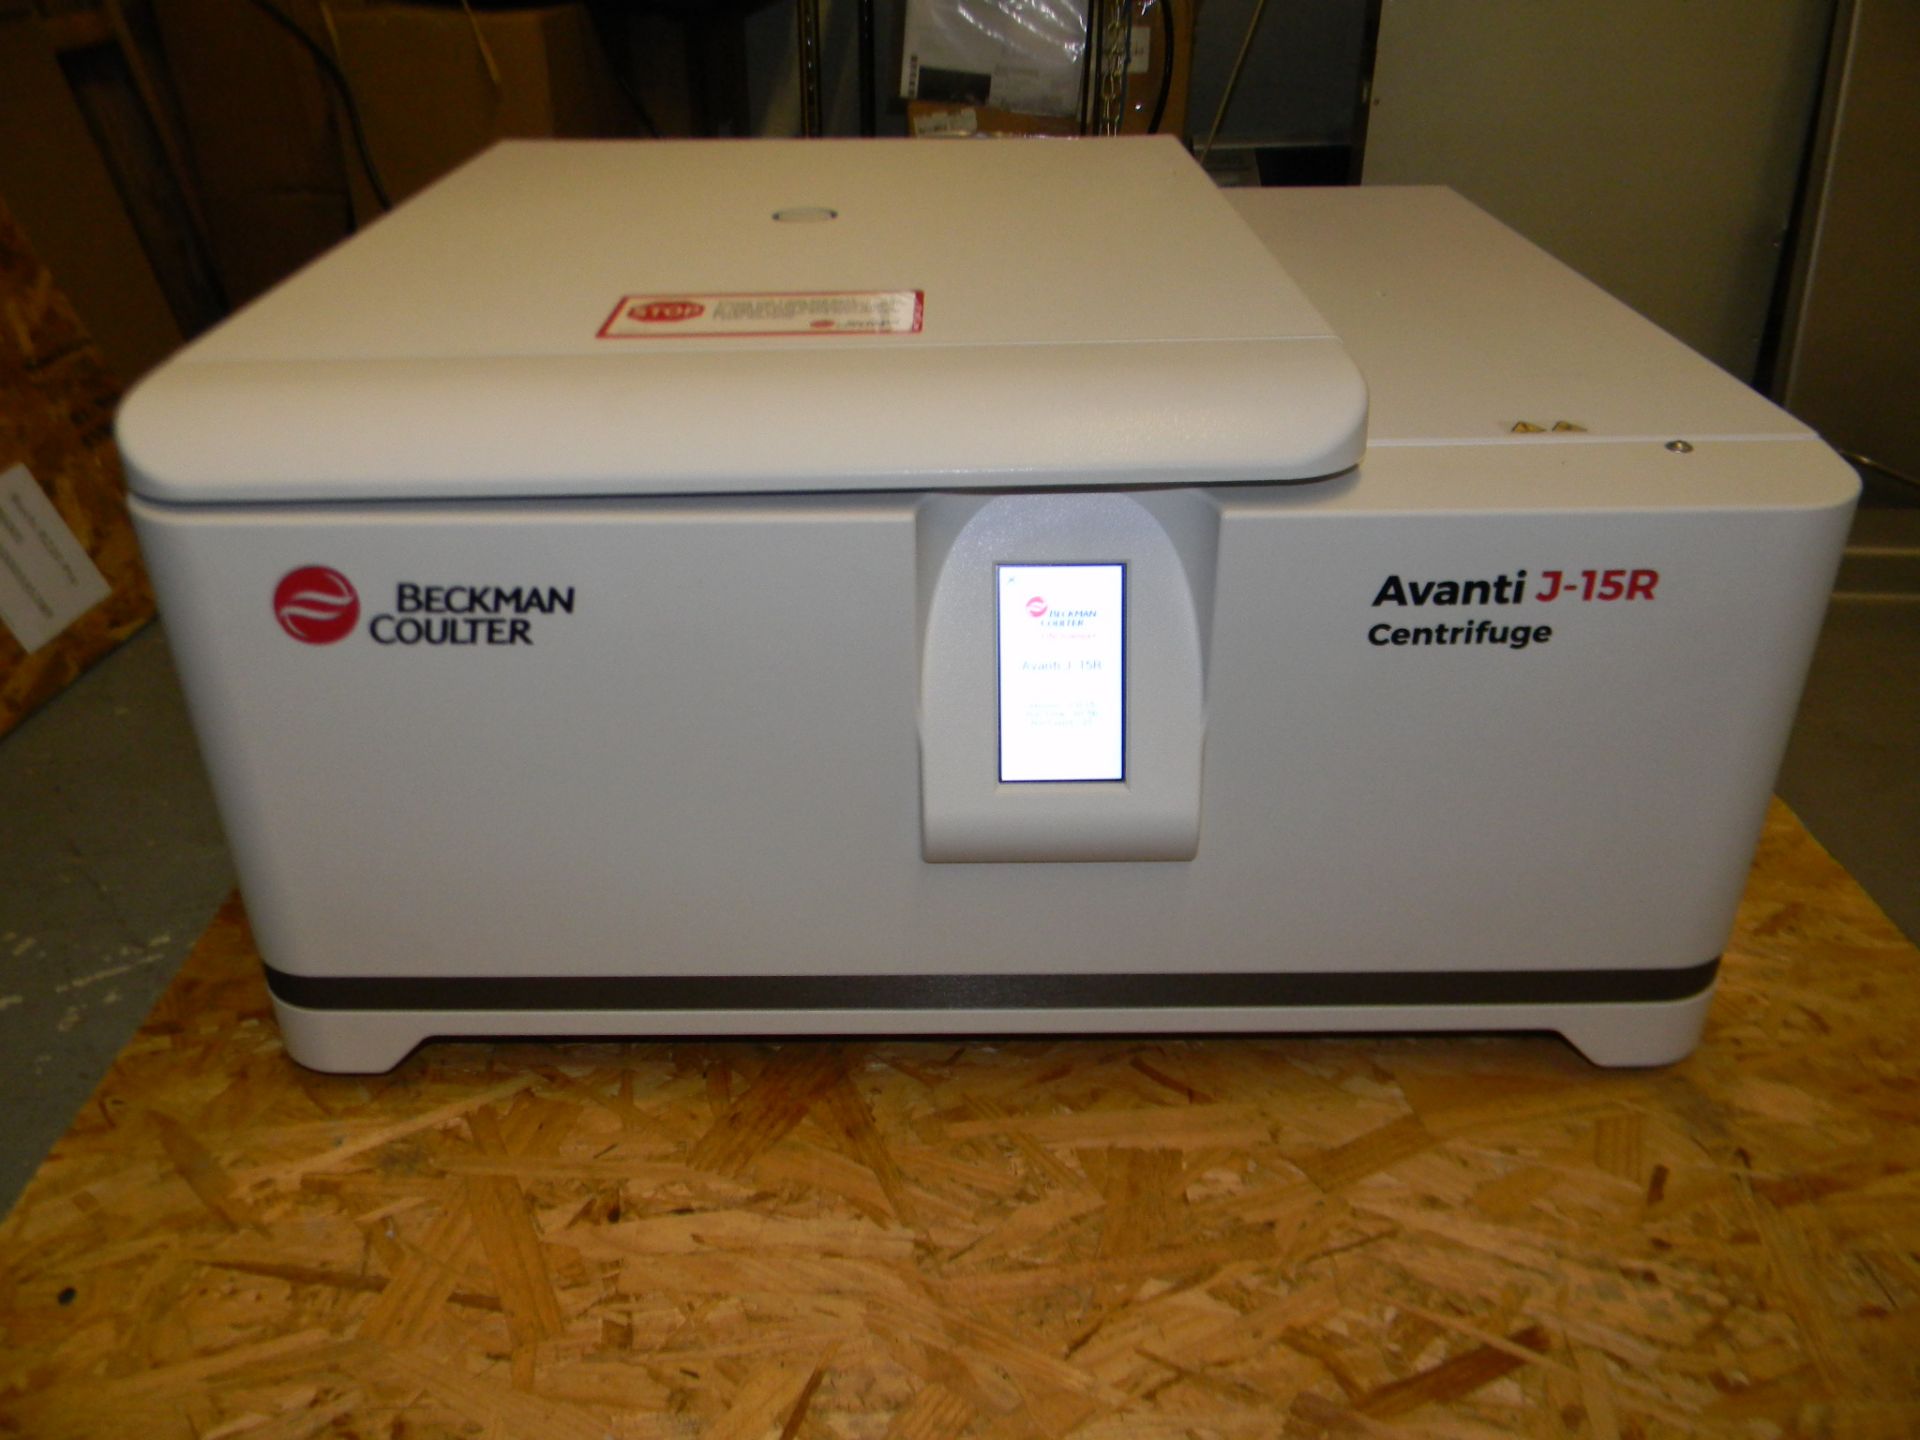 Beckman Coulter Avanti J-15R IVD Refrigerated Centrifuge With JS-4.750 Rotor, Beckman Coulter 349950